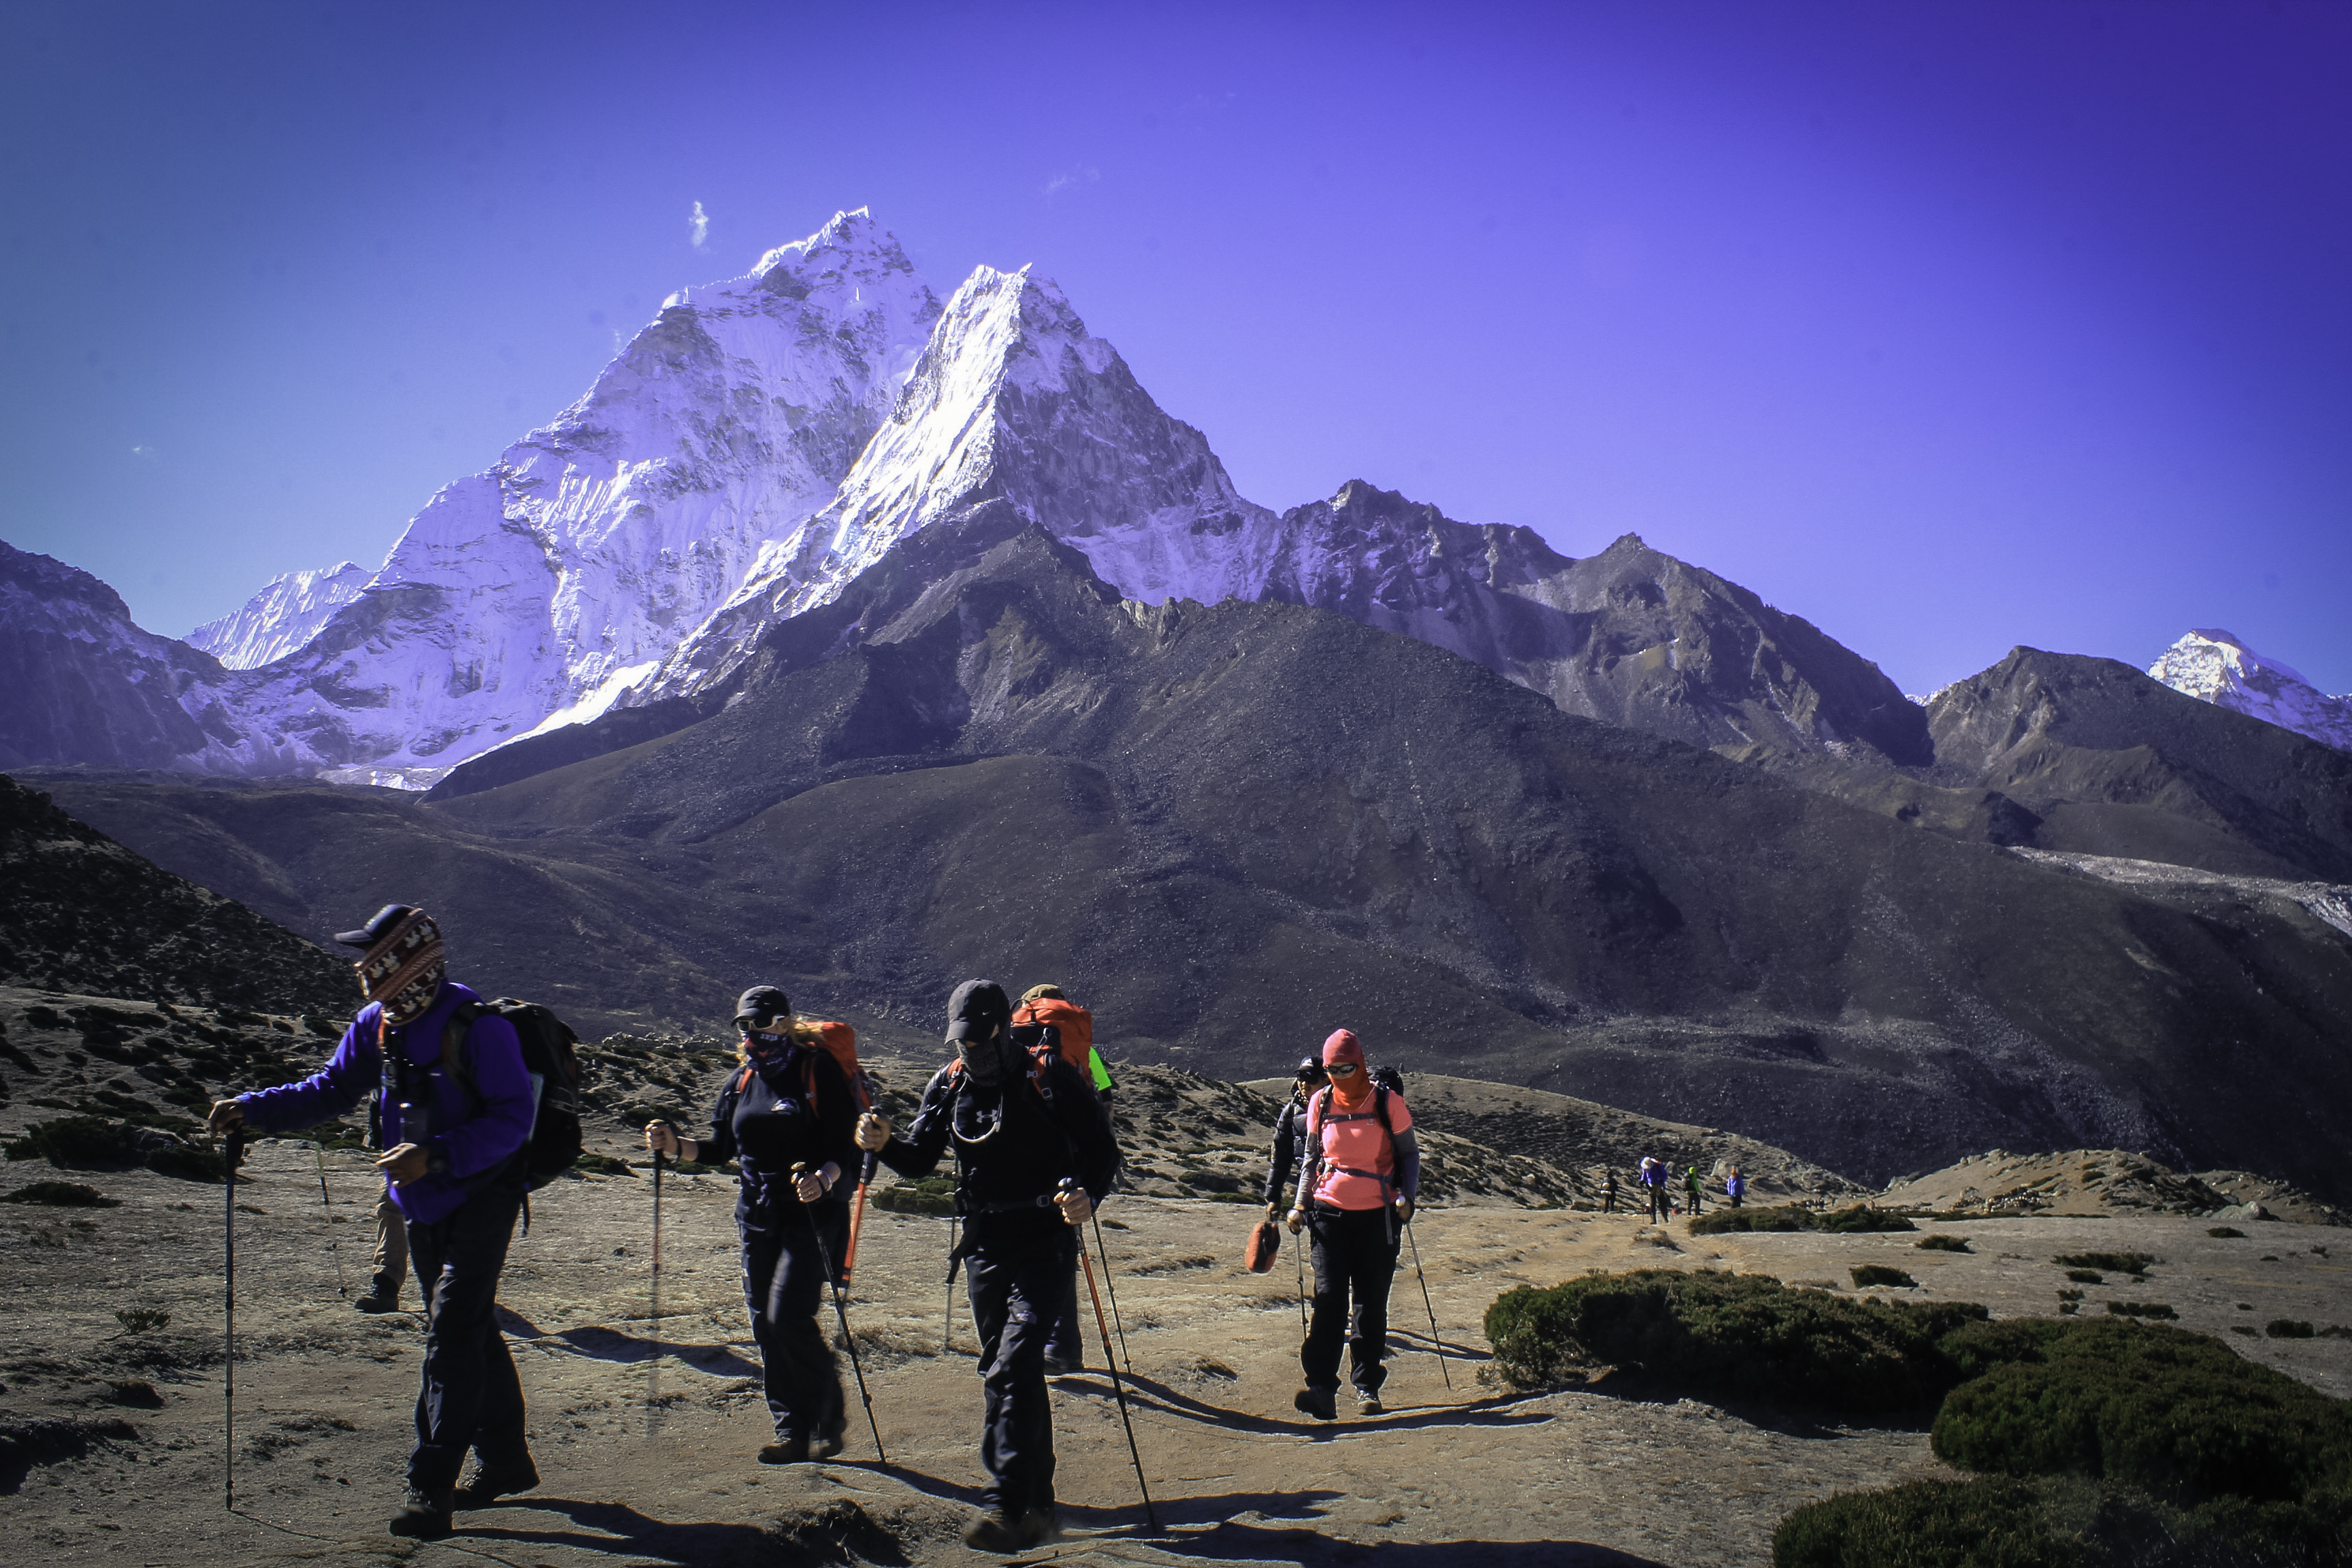 Views on the Ian Taylor Trekking trip to Everest Base Camp